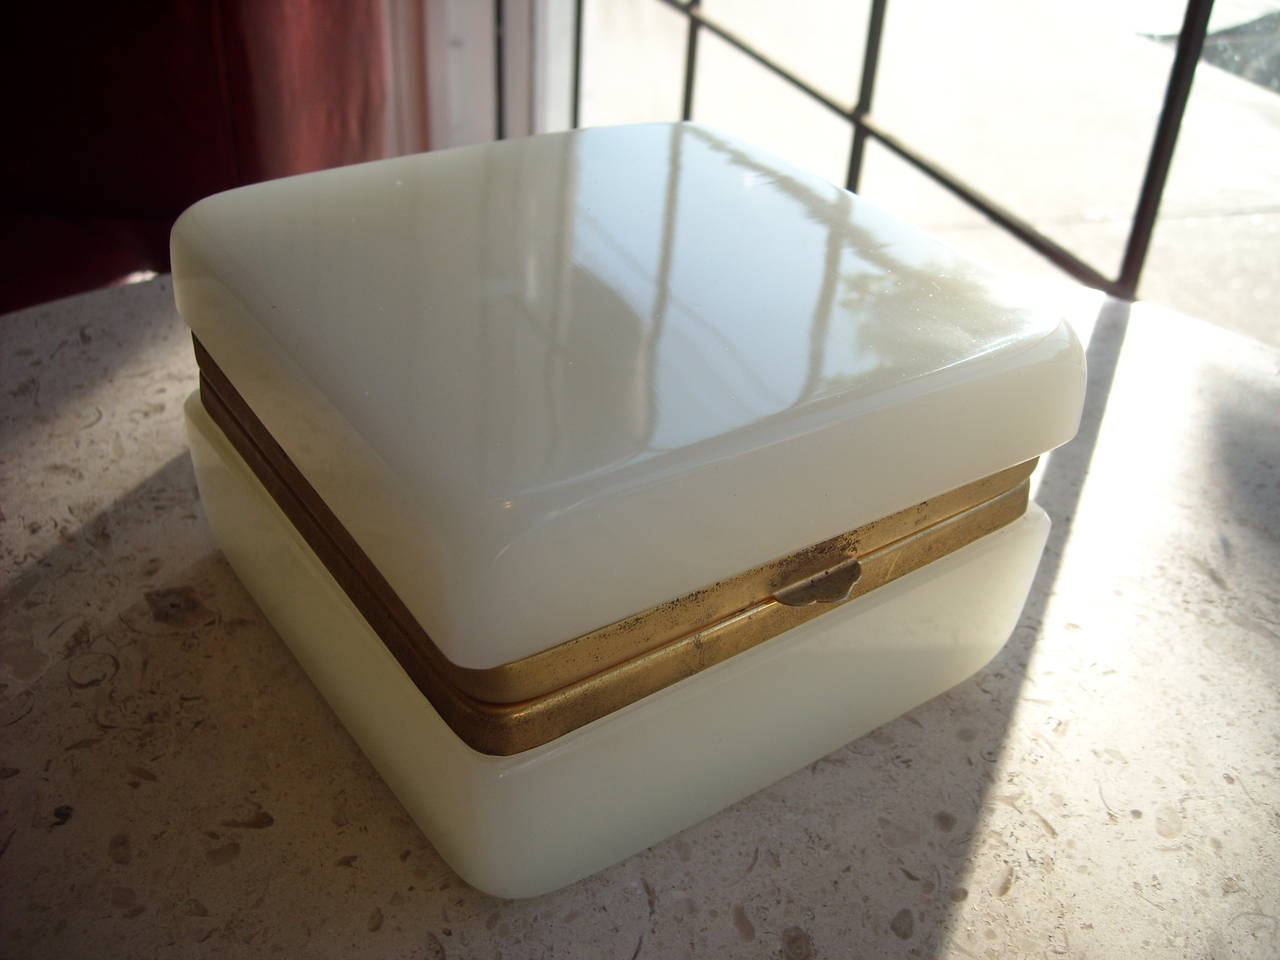 Just an amazing clean lines in this opaline box. This box is in excellent condition.